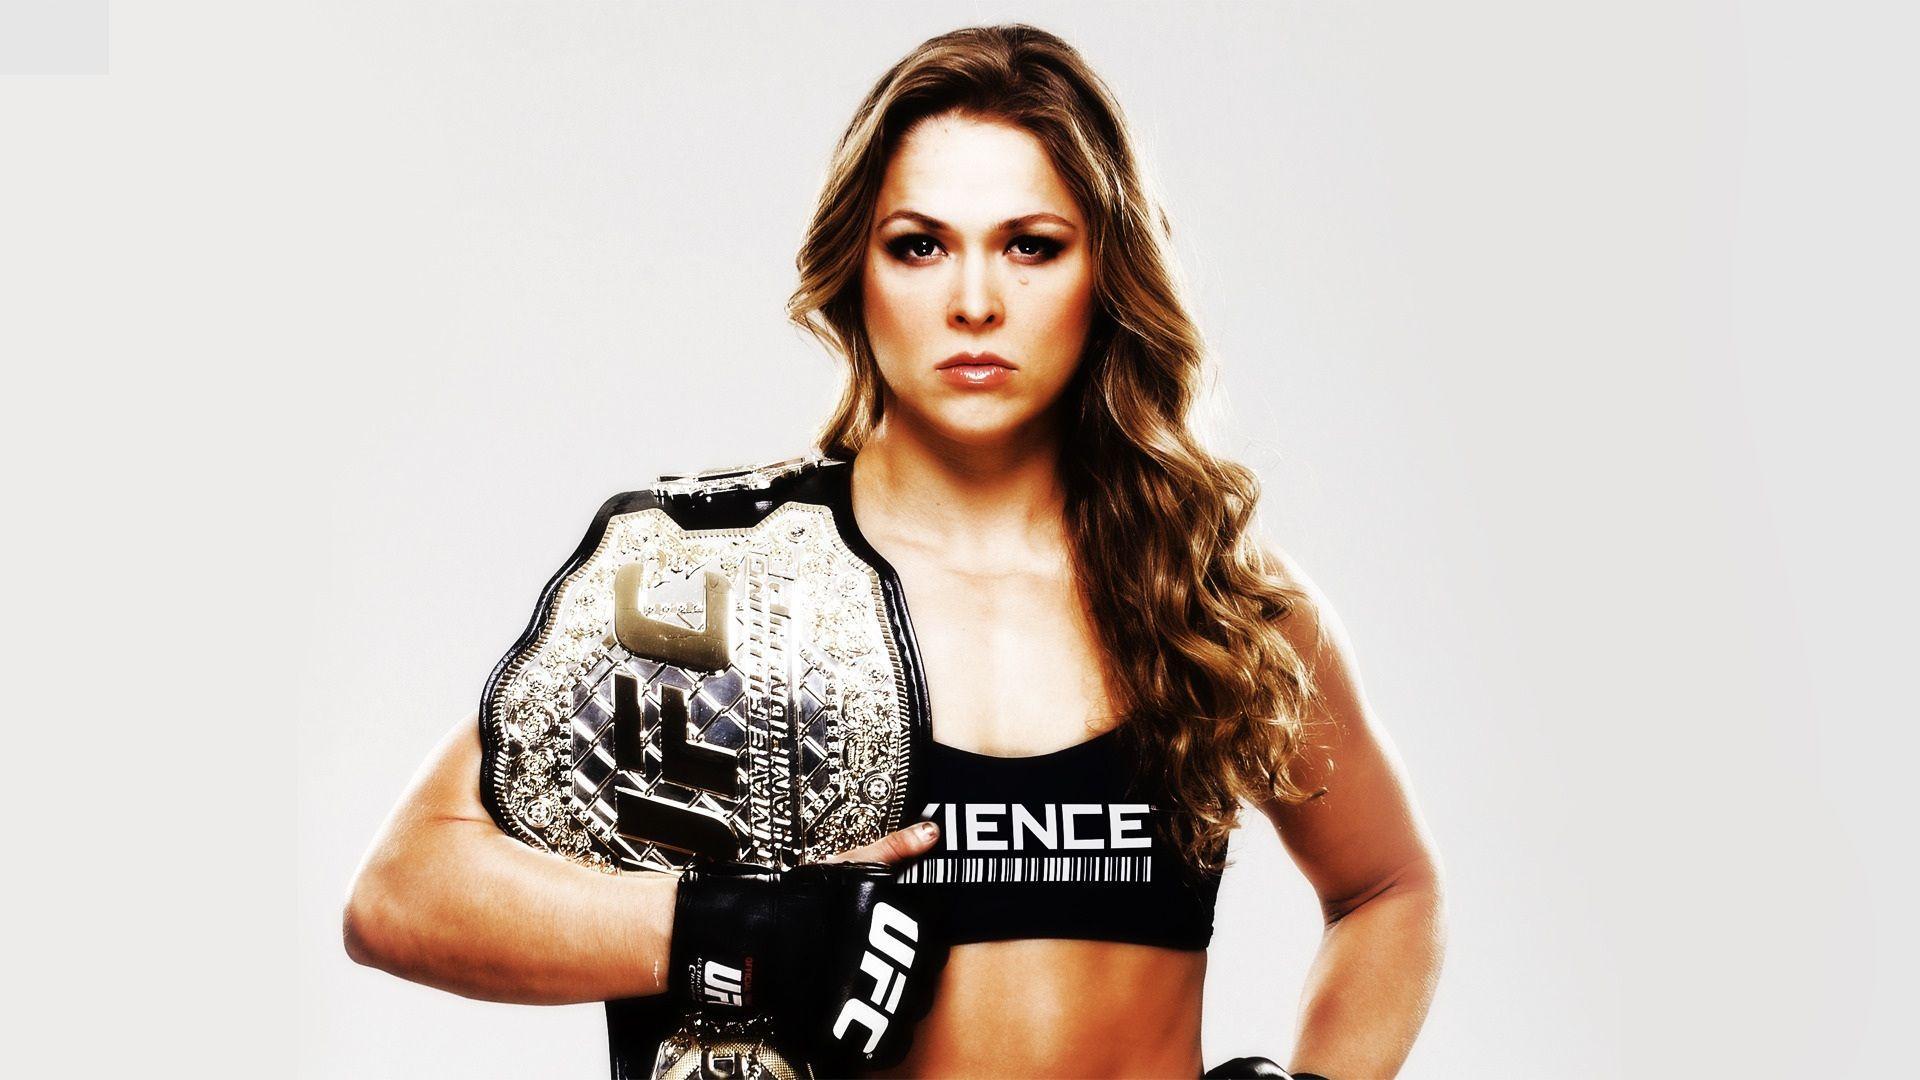 Ronda Rousey Wallpapers High Resolution and Quality Download